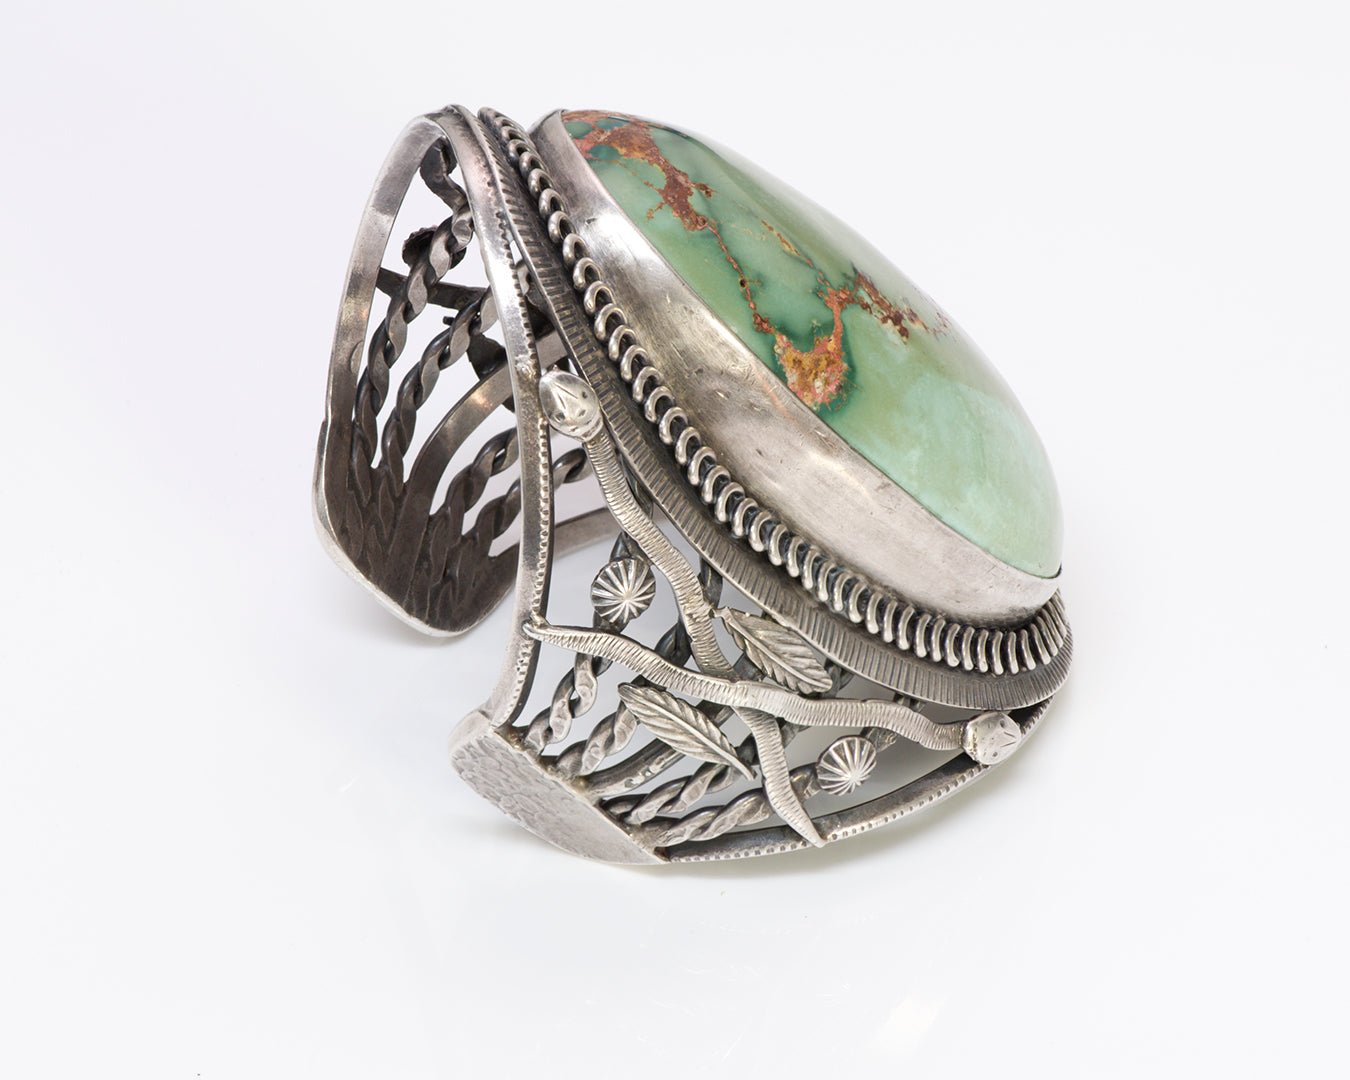 Native American Indian Silver Snake Turquoise Cuff Bracelet